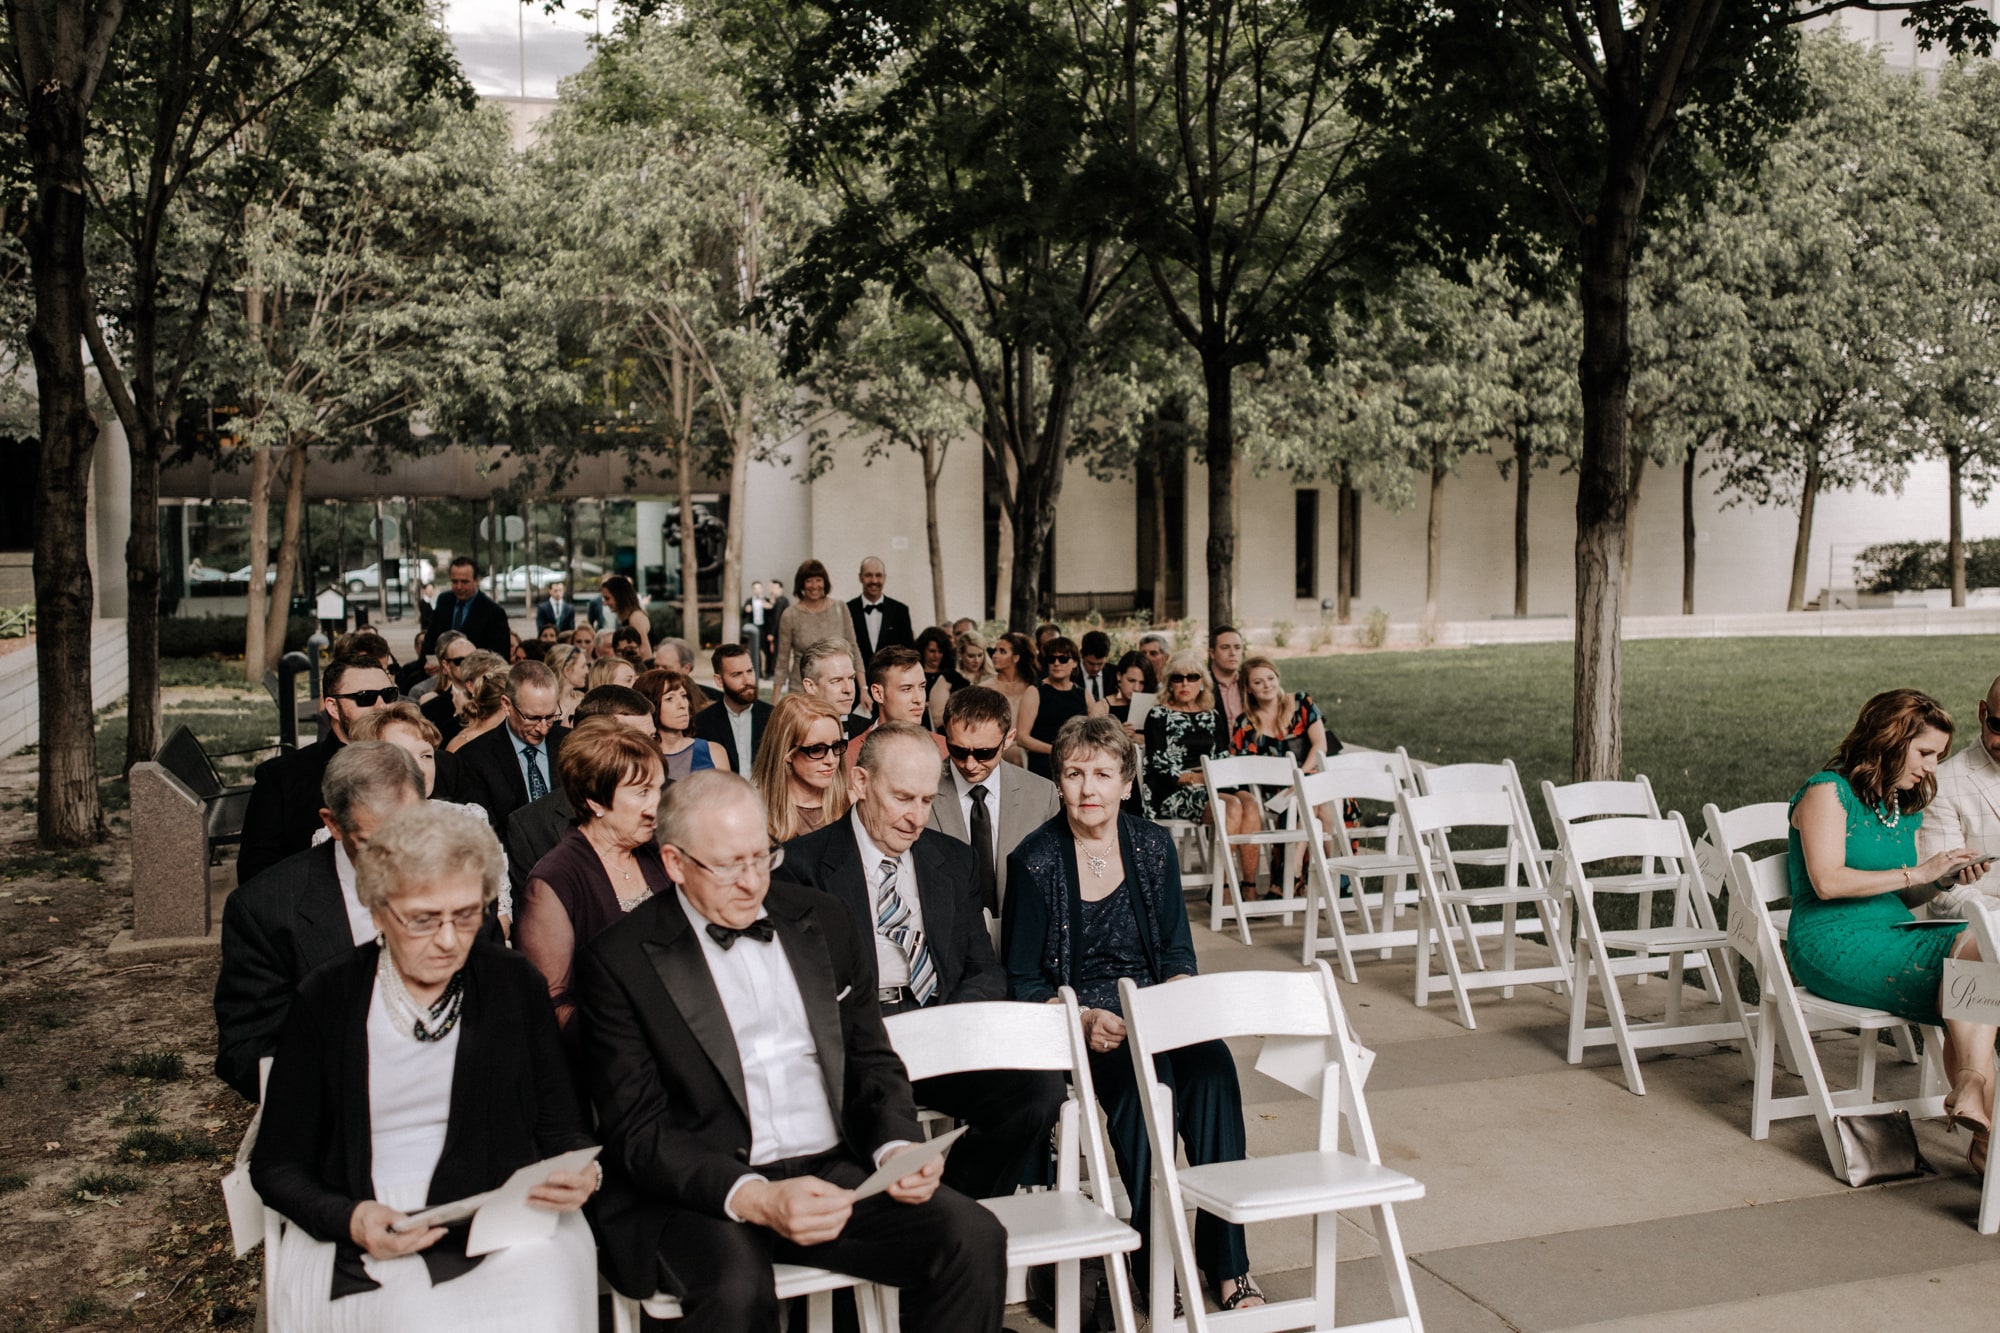 Guests sit in white chairs awaiting the bride and groom during an outdoor wedding ceremony at the Minneapolis Institute of Art, capture by j.olson weddings.